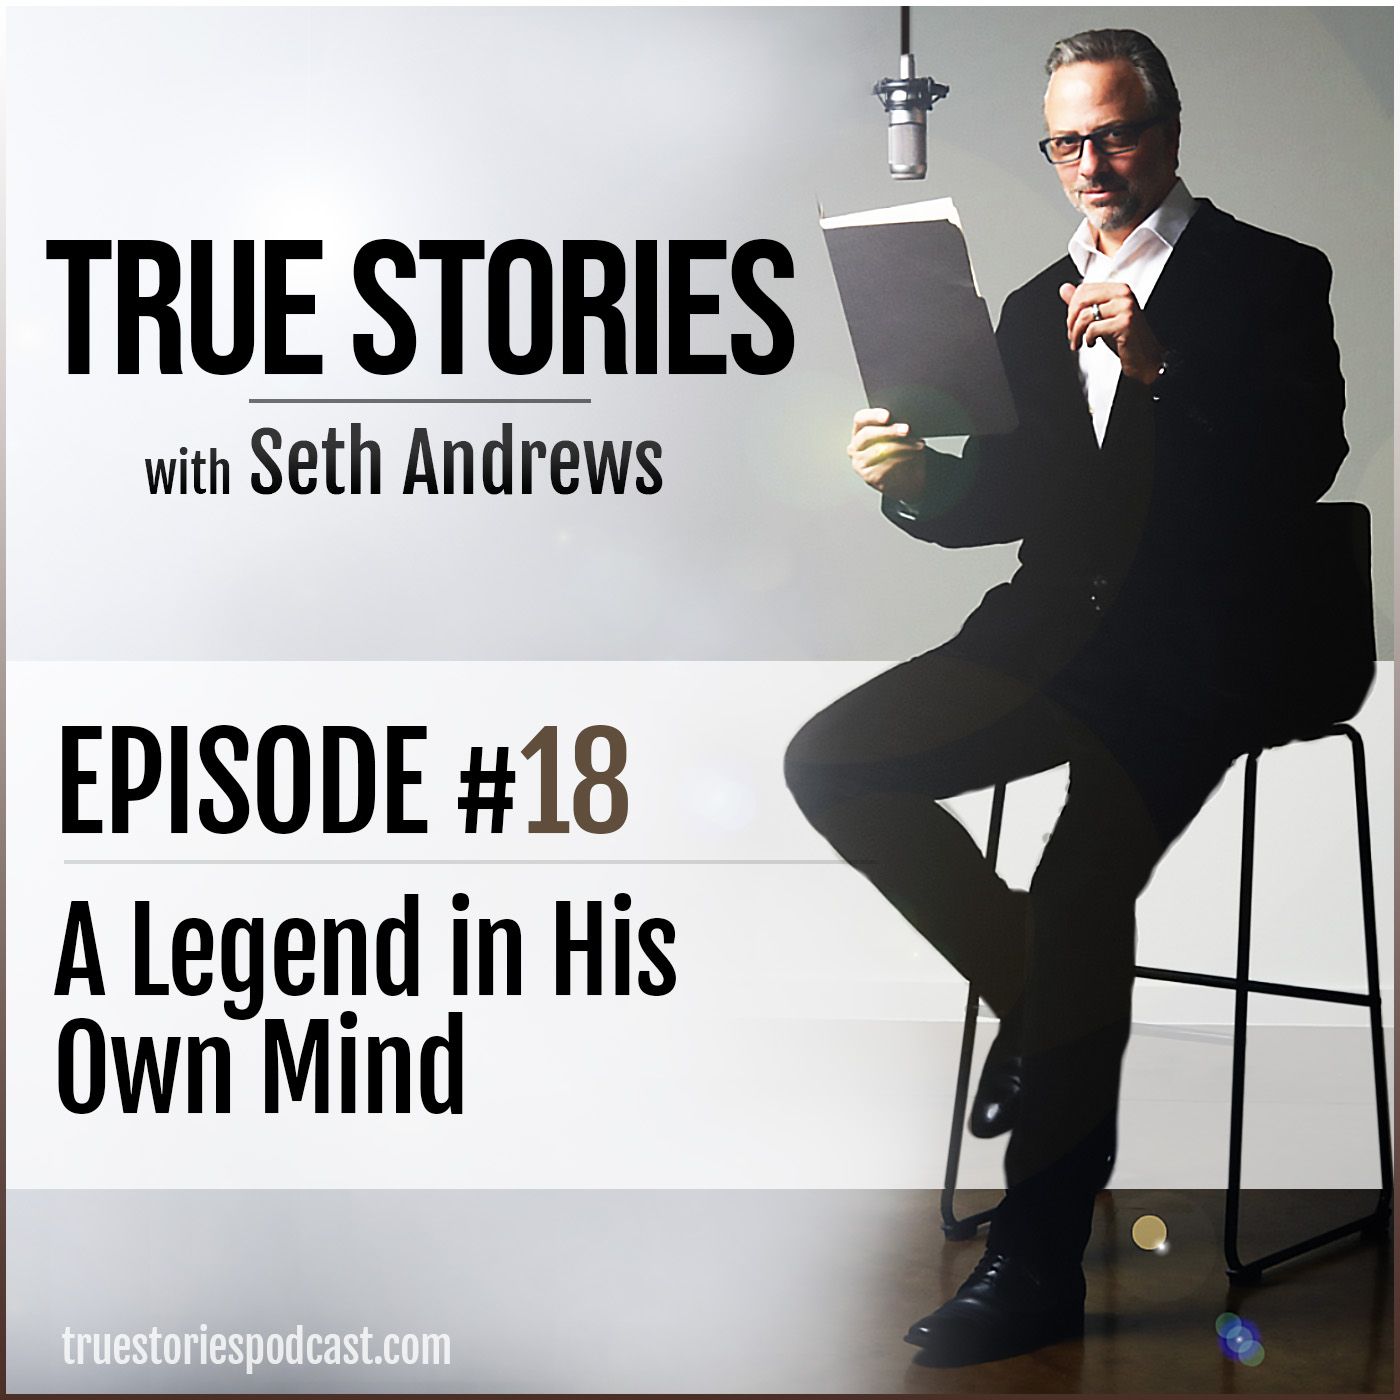 True Stories #18 - A Legend in his Own Mind